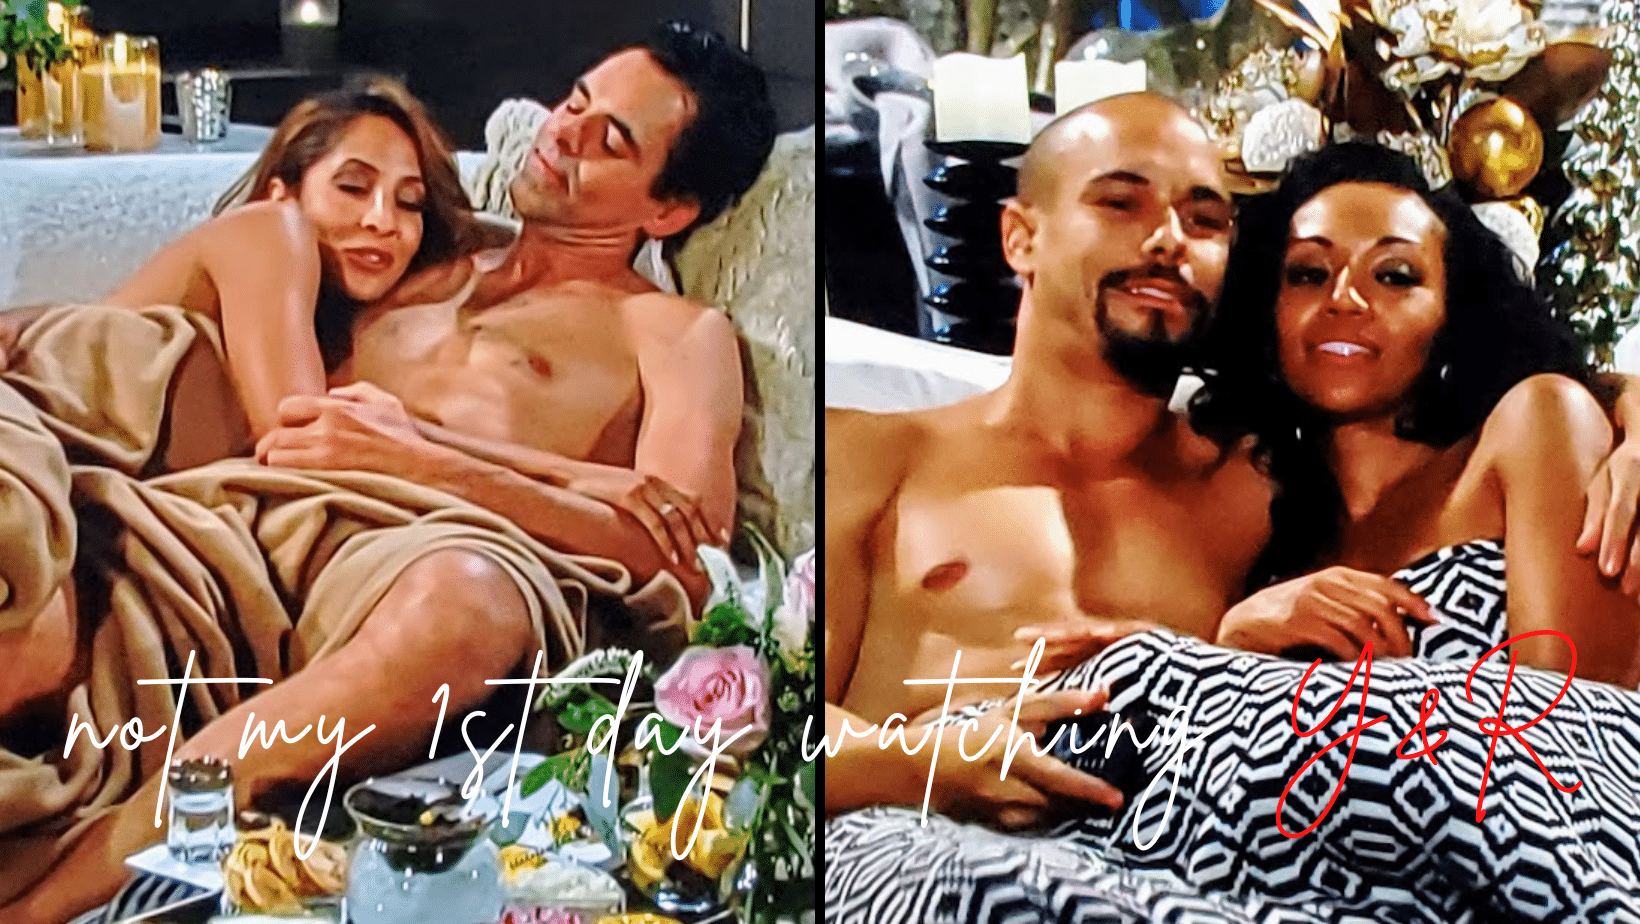 Limited Sets on Y&R & Sex on Couches | Where are Their Bedrooms?